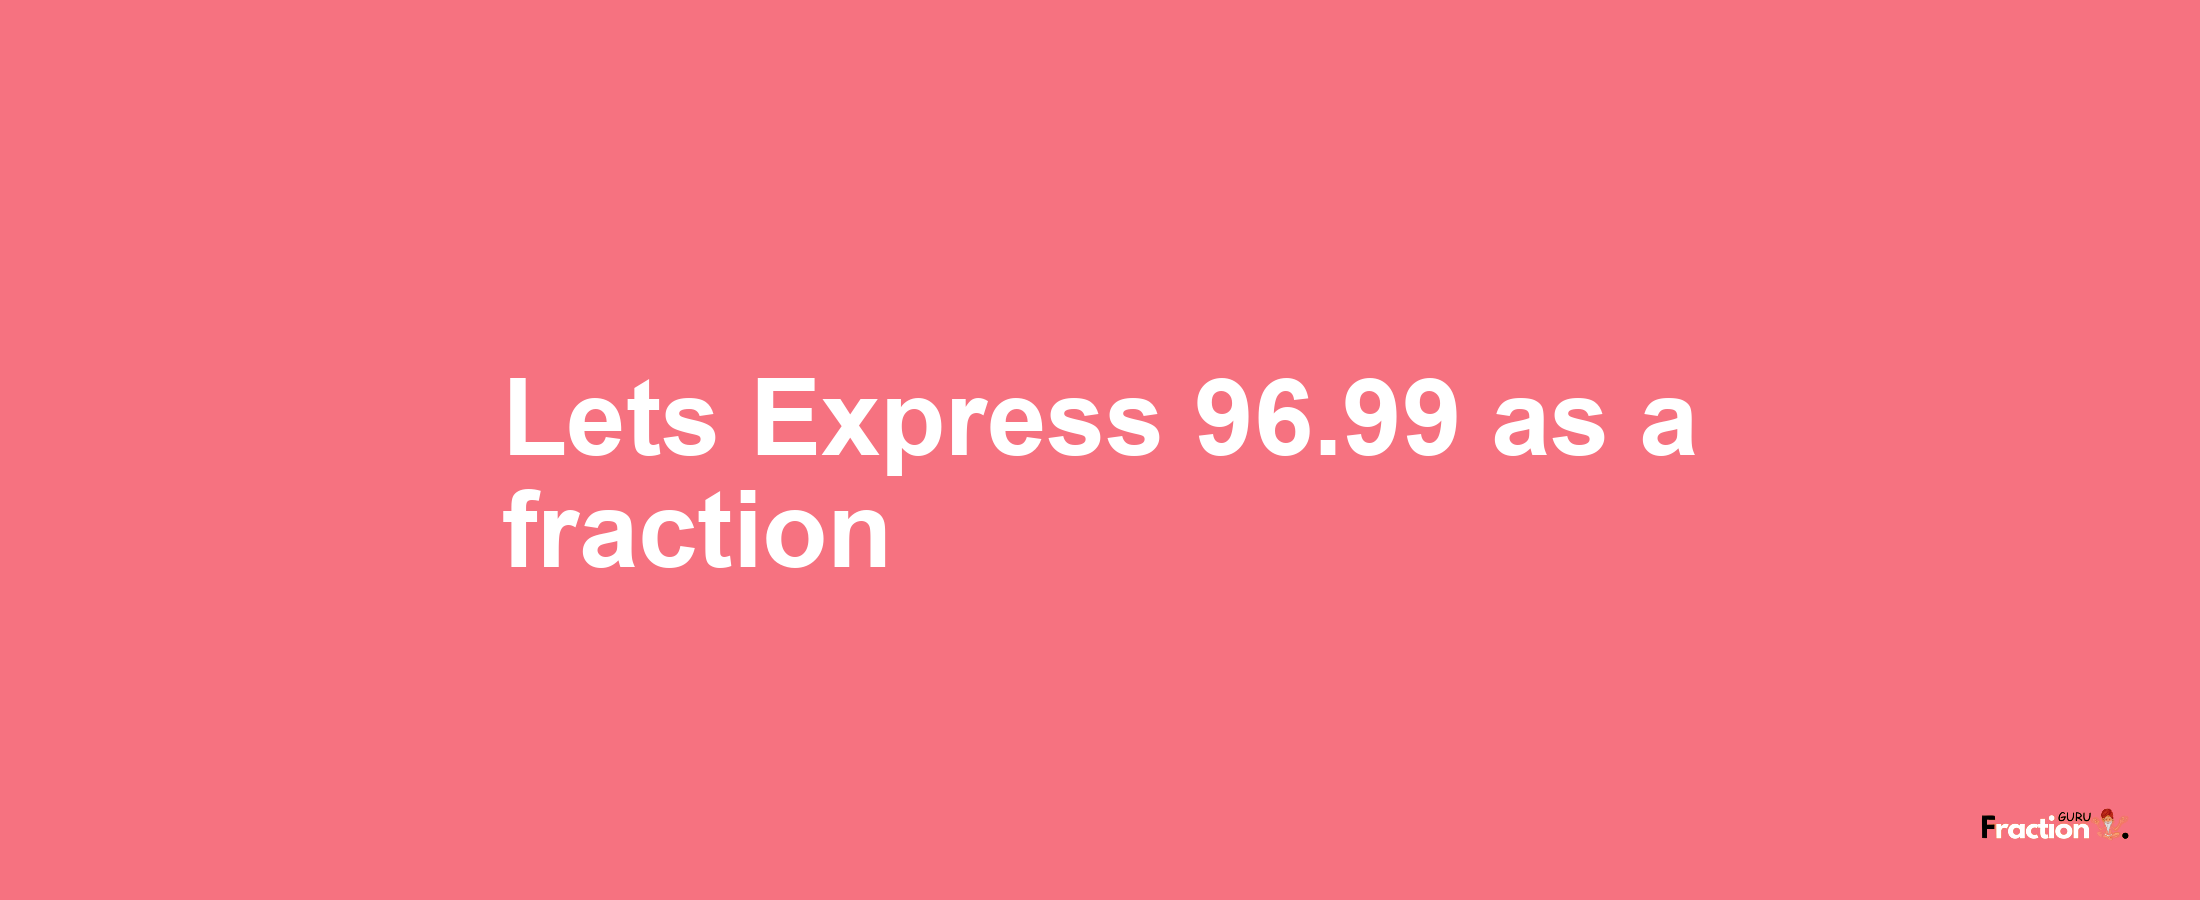 Lets Express 96.99 as afraction